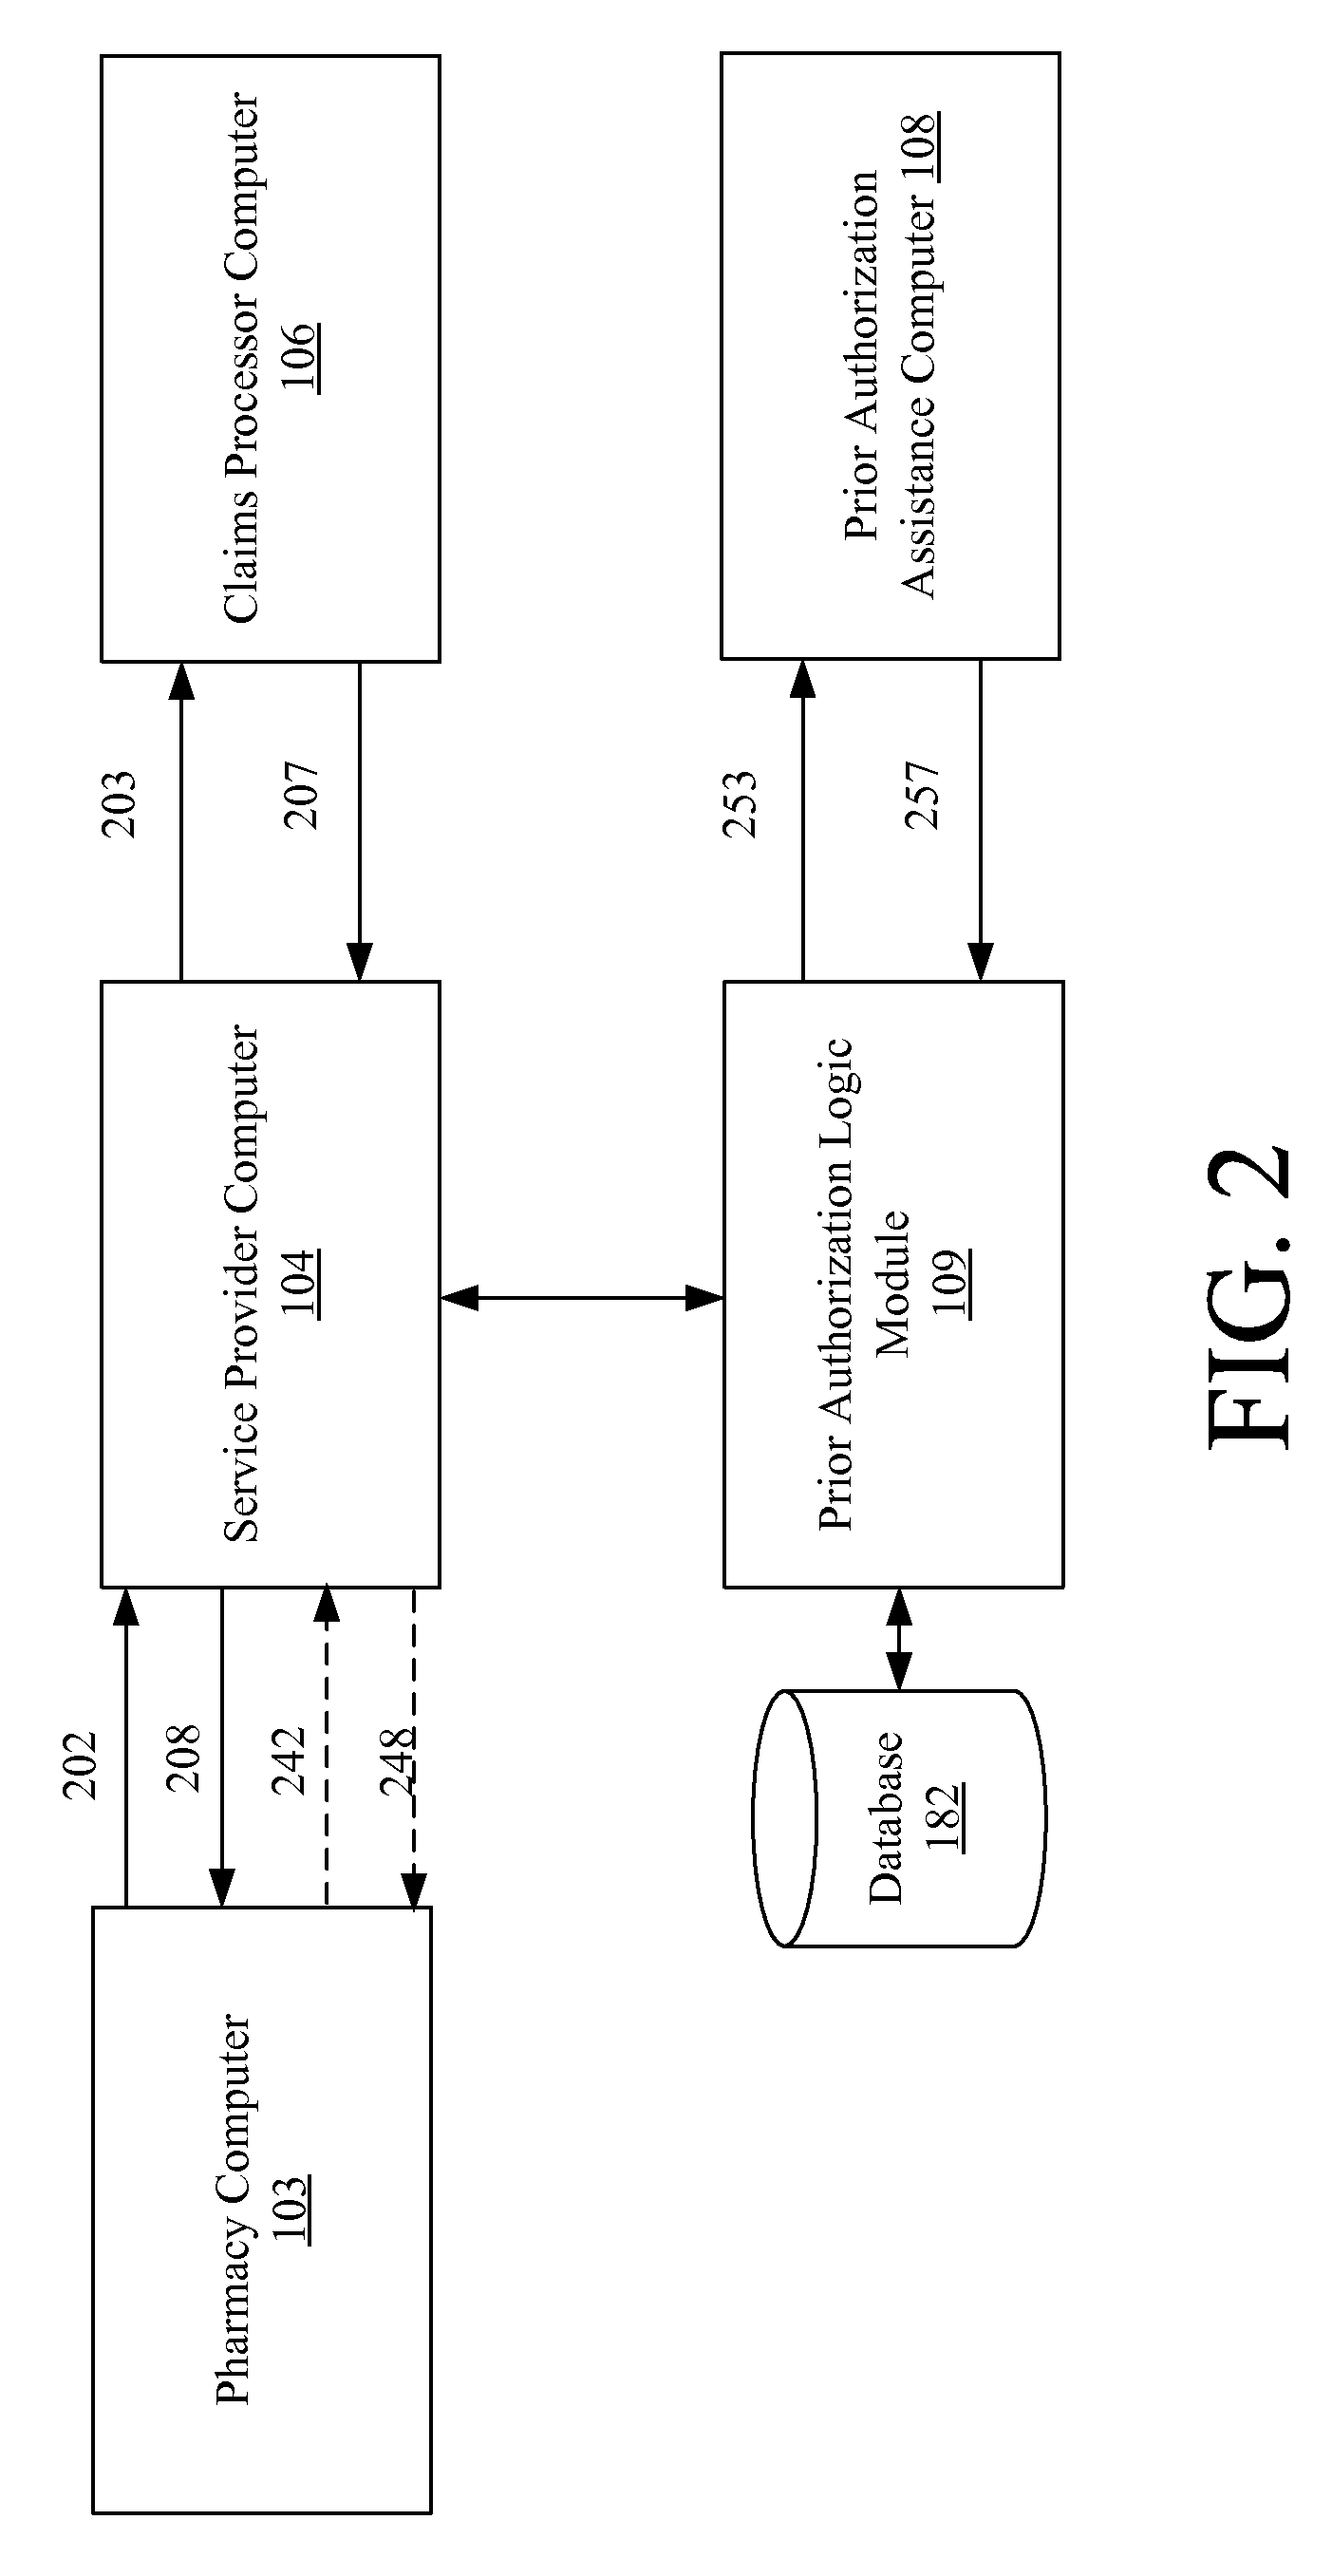 Systems and methods for facilitating claim rejection resolution by providing prior authorization assistance